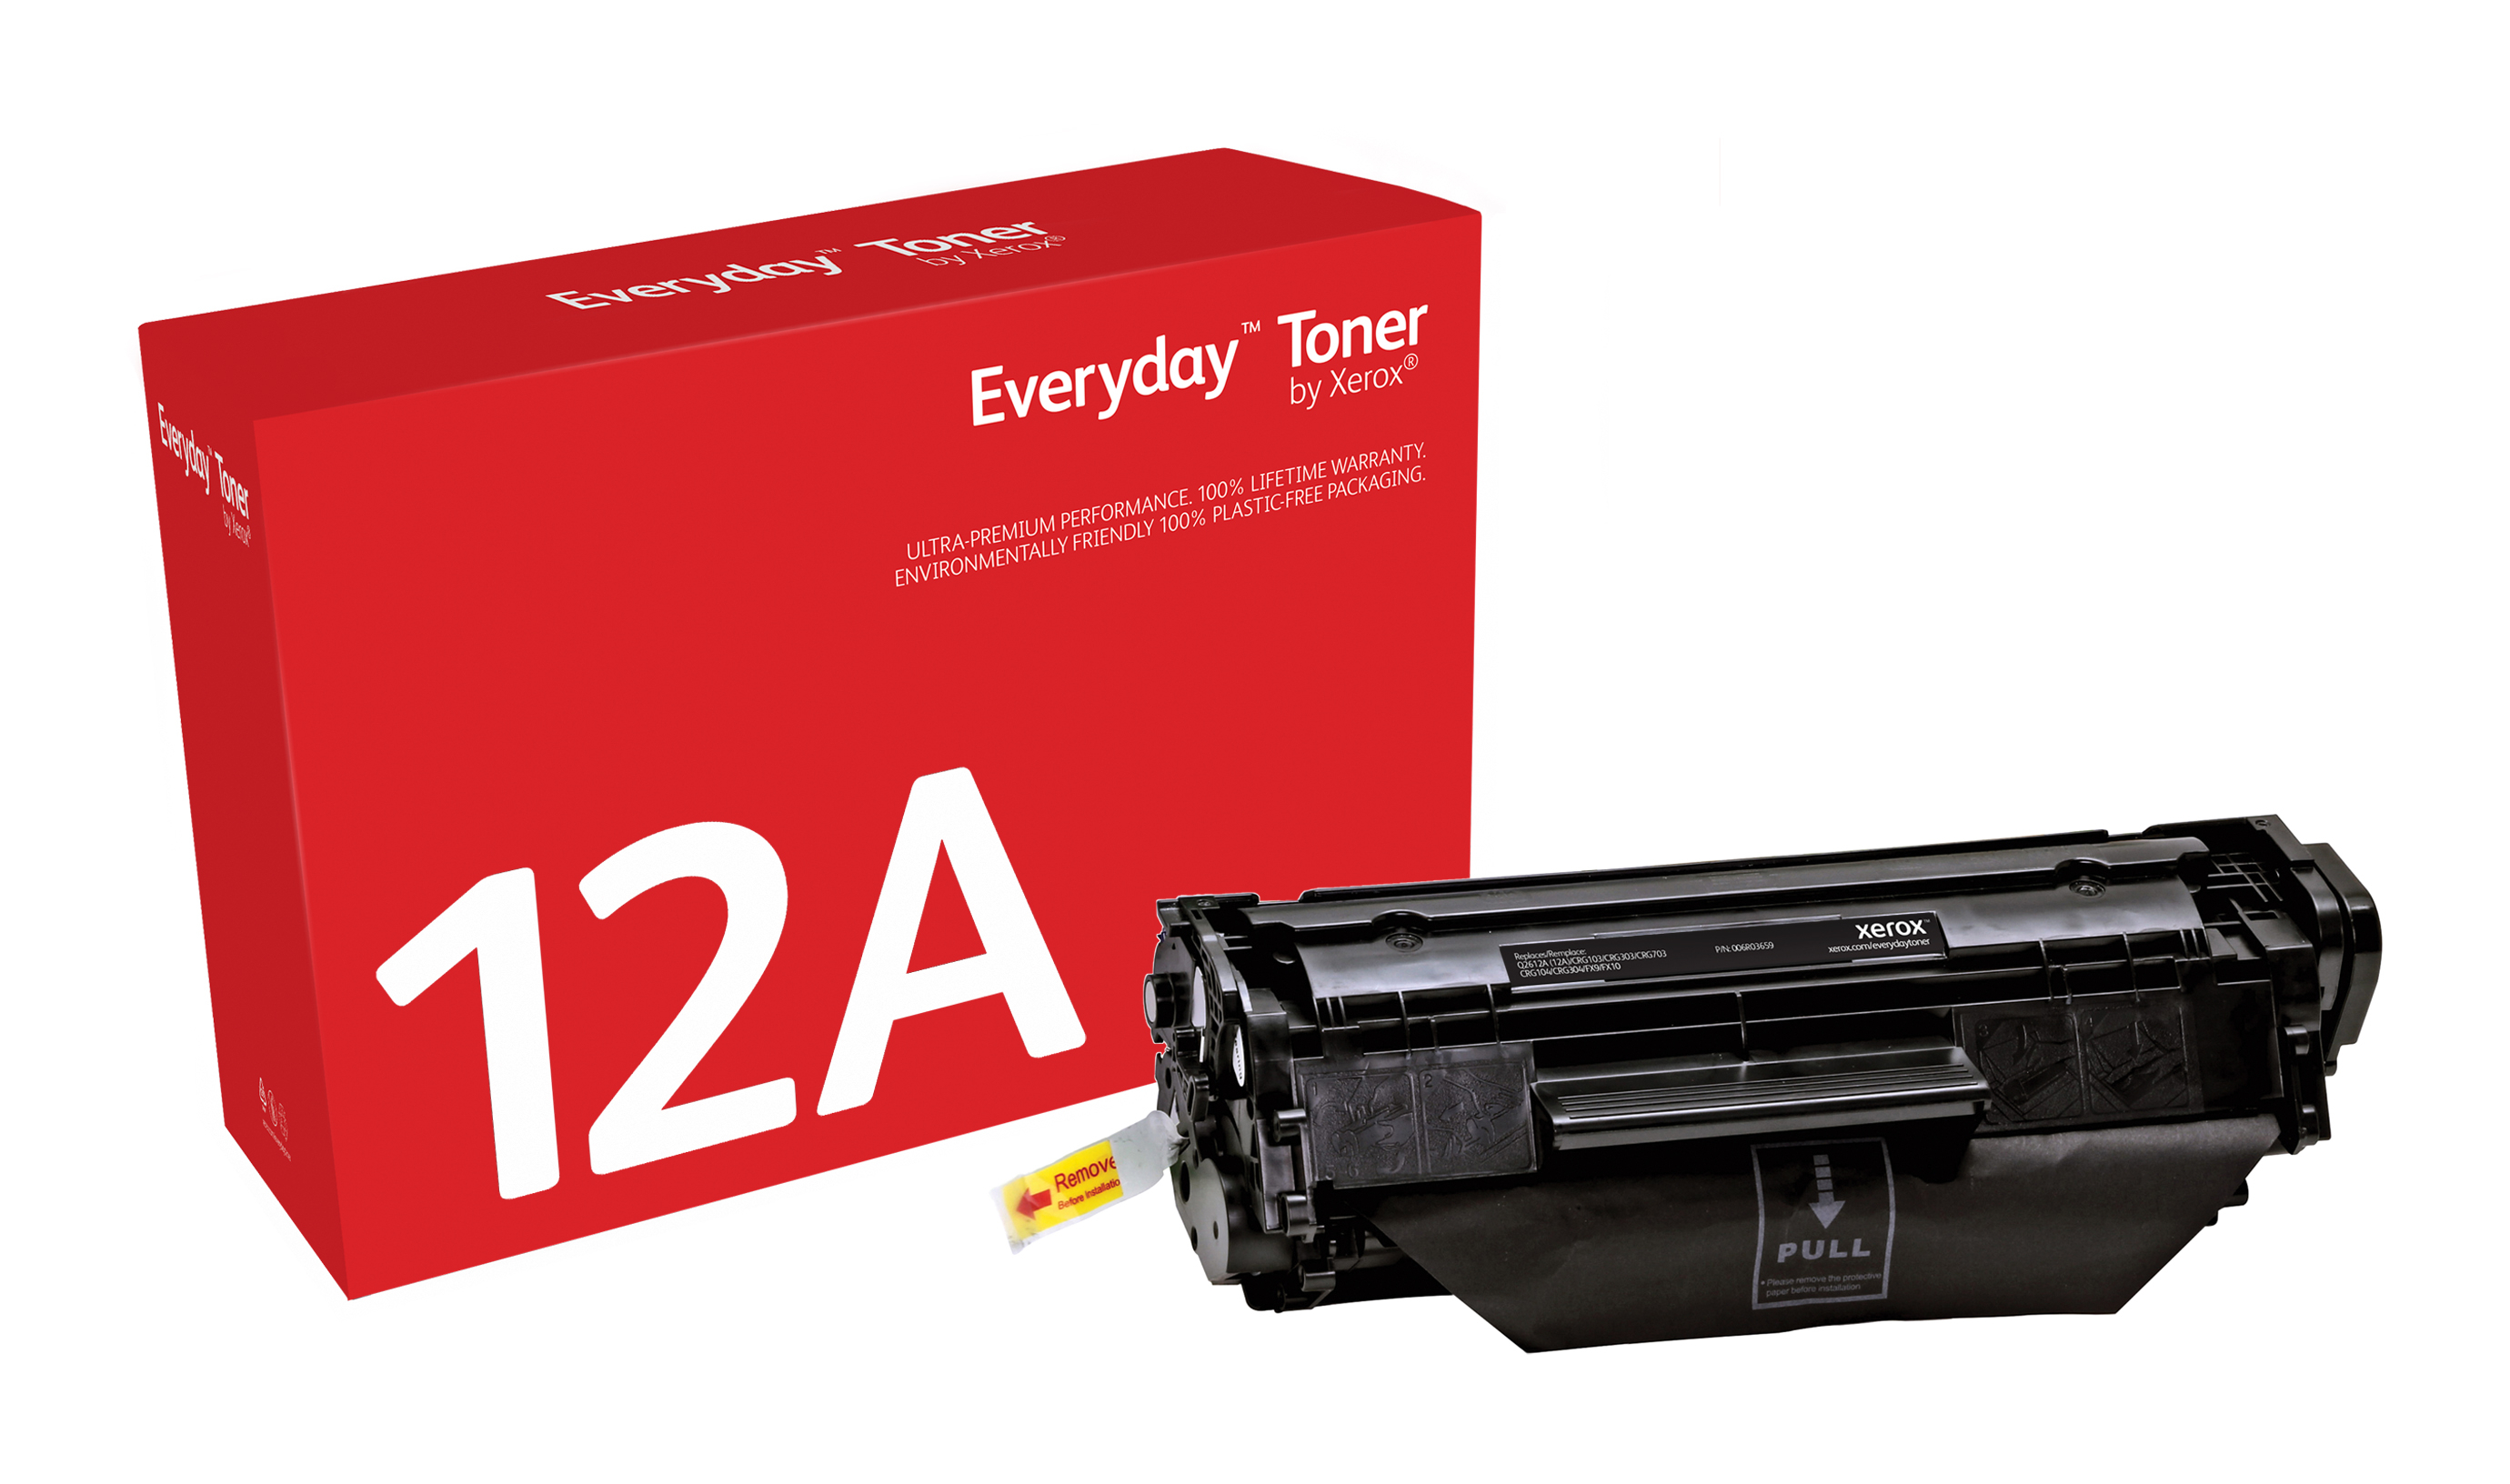 Everyday with HP 12A Standard Yield 006R03659 by Xerox